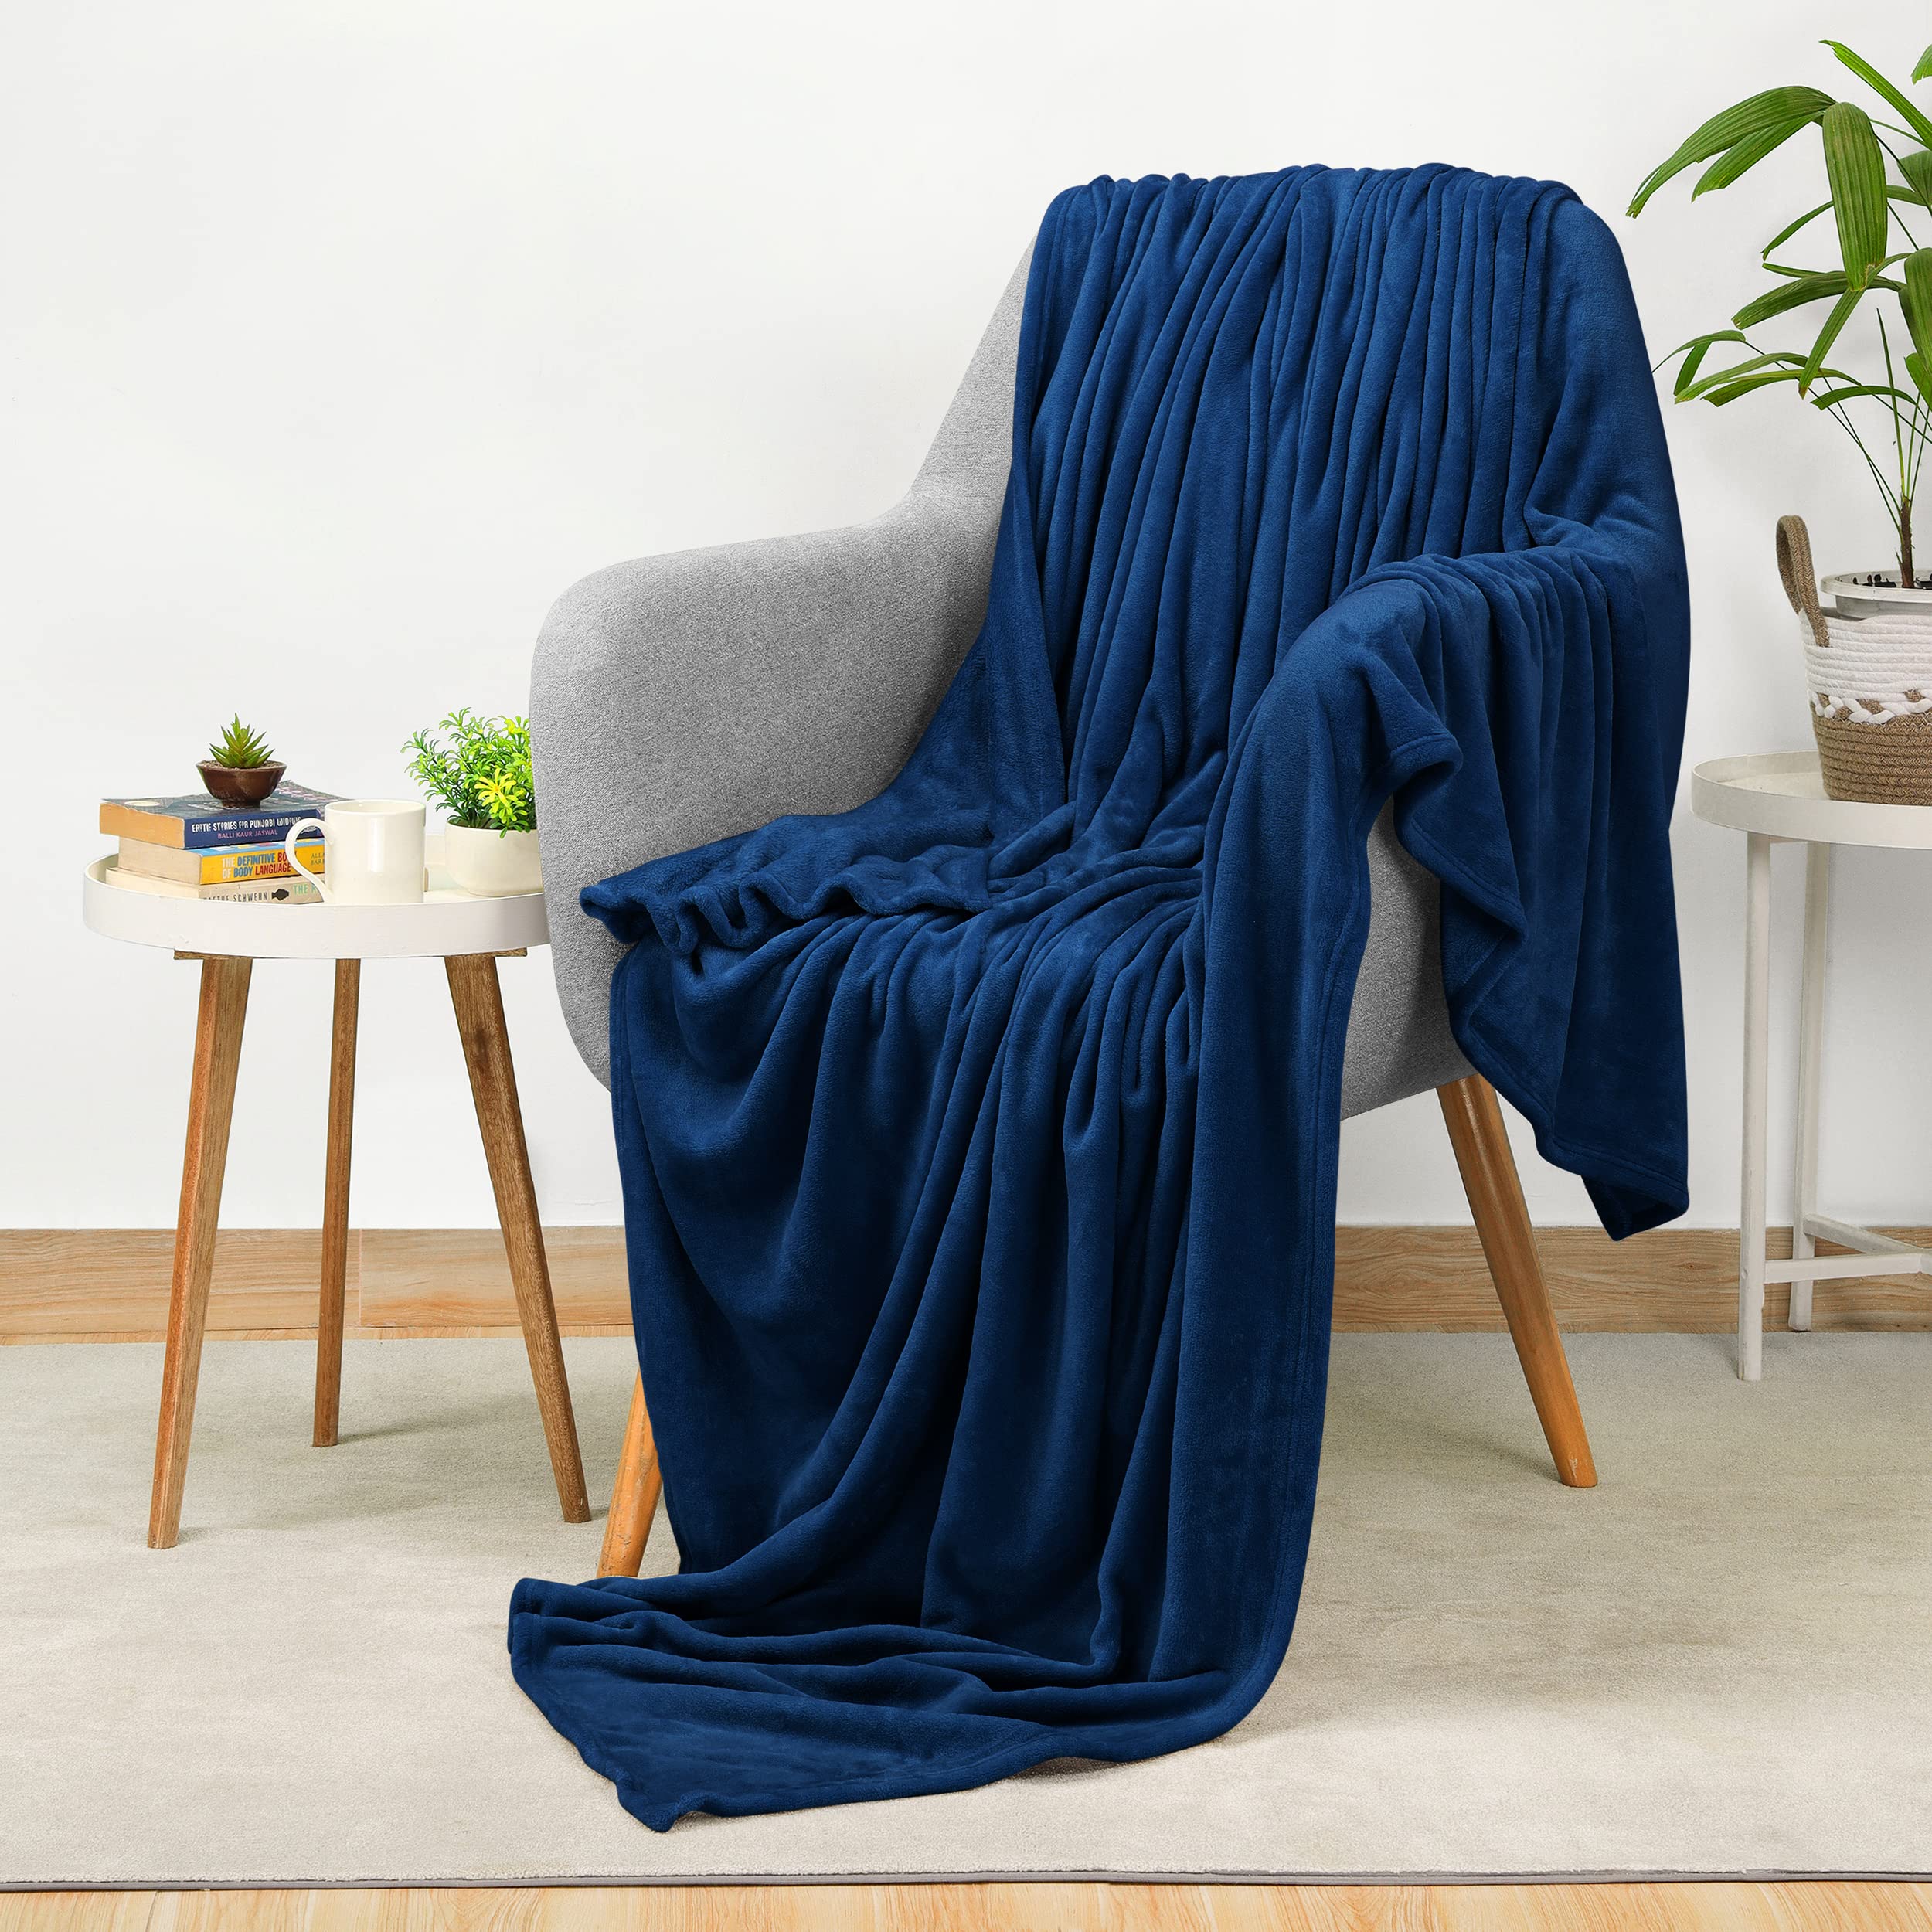 Book Cover Utopia Bedding Fleece Blanket Throw Size Navy 300GSM Luxury Blanket for Couch Sofa Bed Anti-Static Fuzzy Soft Blanket Microfiber (60x50 Inches) Throw Navy